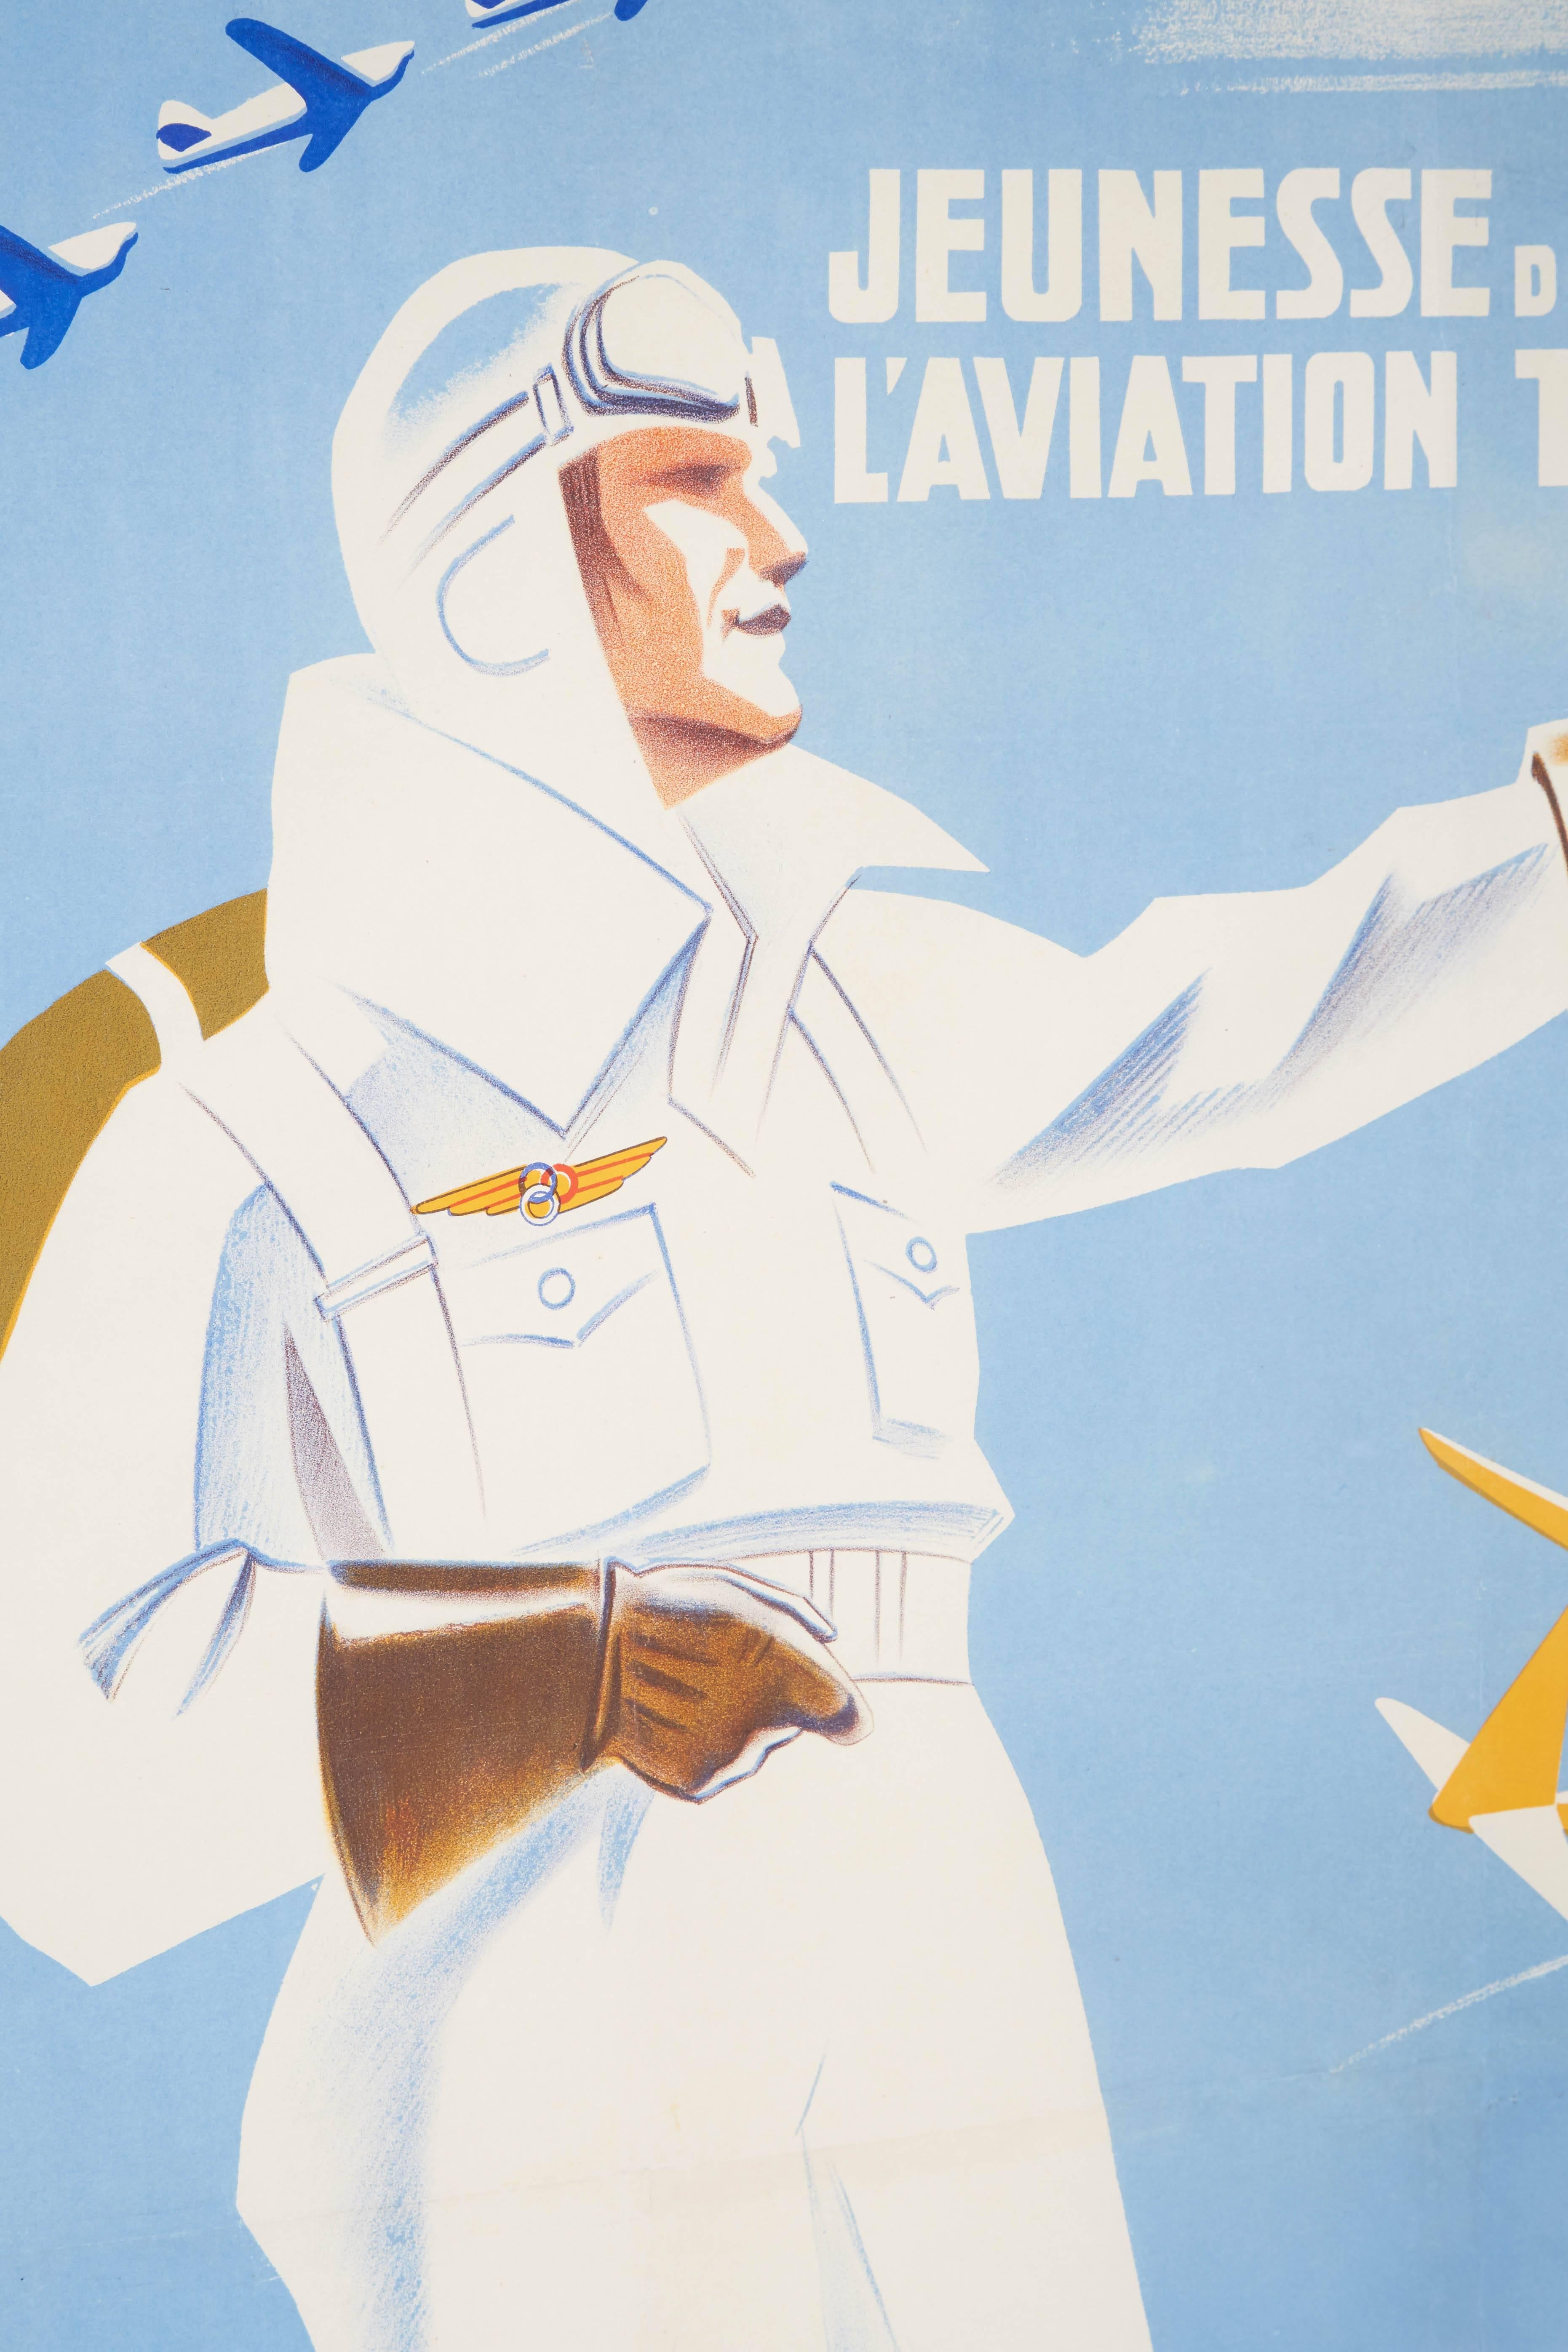 Aviation Populaire large promotional poster by Geo Ham, France, 1930s, published by the Ministry of Aviation, promoting the need for young people to get involved in the field of aviation features white-clad pilot point into the blue sky with orange,